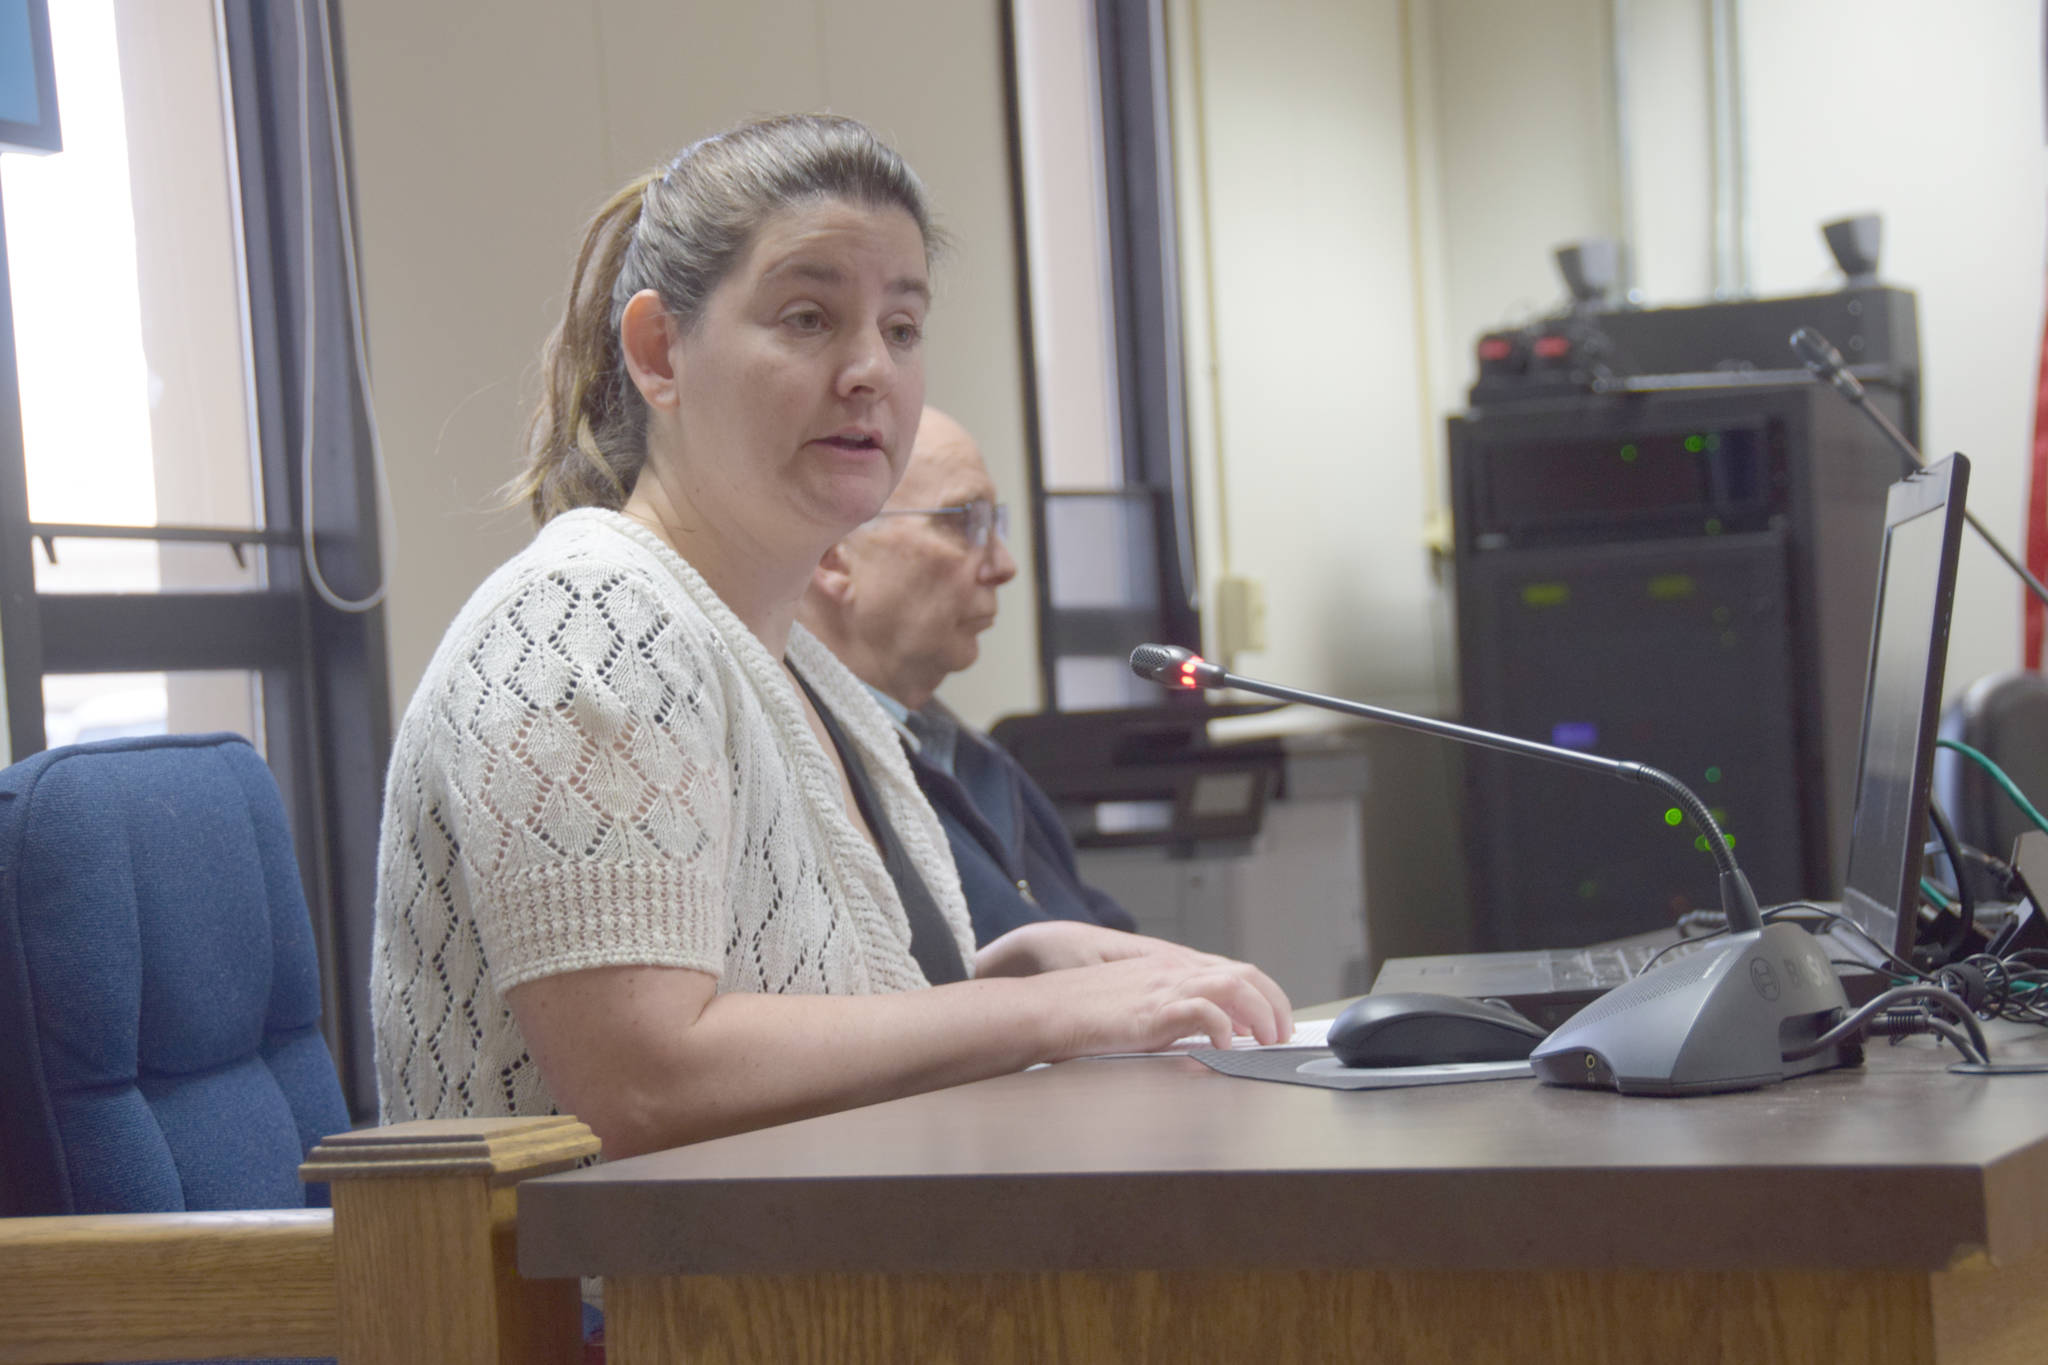 Rebecca Carnell, Director of Nursing and Clinical Services at 1st Choice Home Health Care, gives a presentation to the Kenai Peninsula Borough Assembly at the Borough Assembly Chambers on Tuesday in Soldotna. (Photo by Brian Mazurek/Peninsula Clarion)